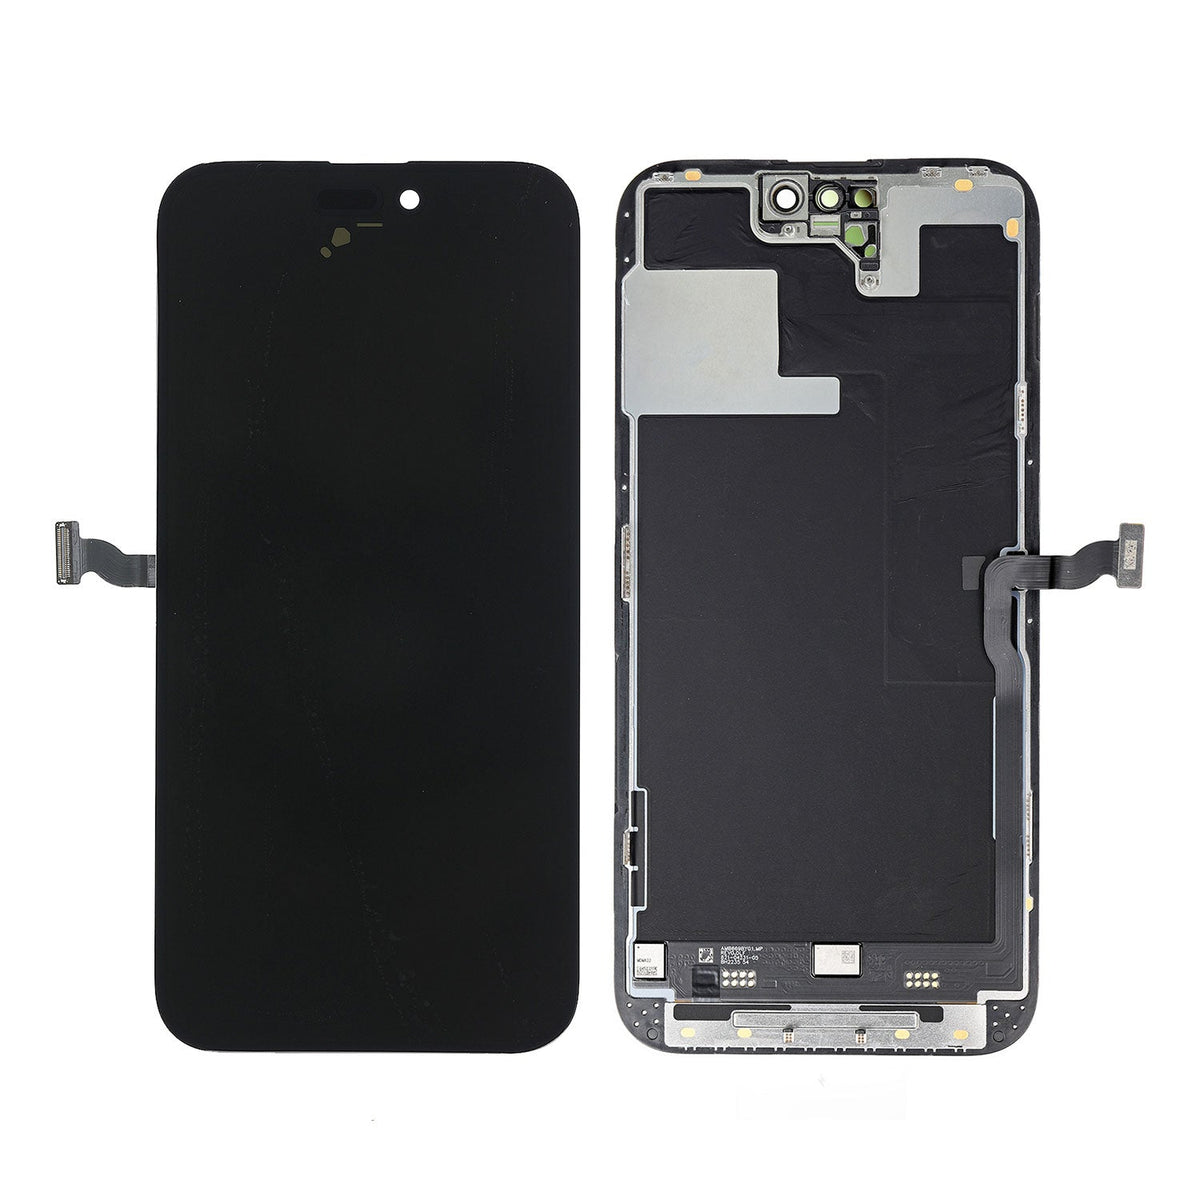 Replacement for iPhone 14 Pro Max OLED Screen Digitizer Assembly - Black